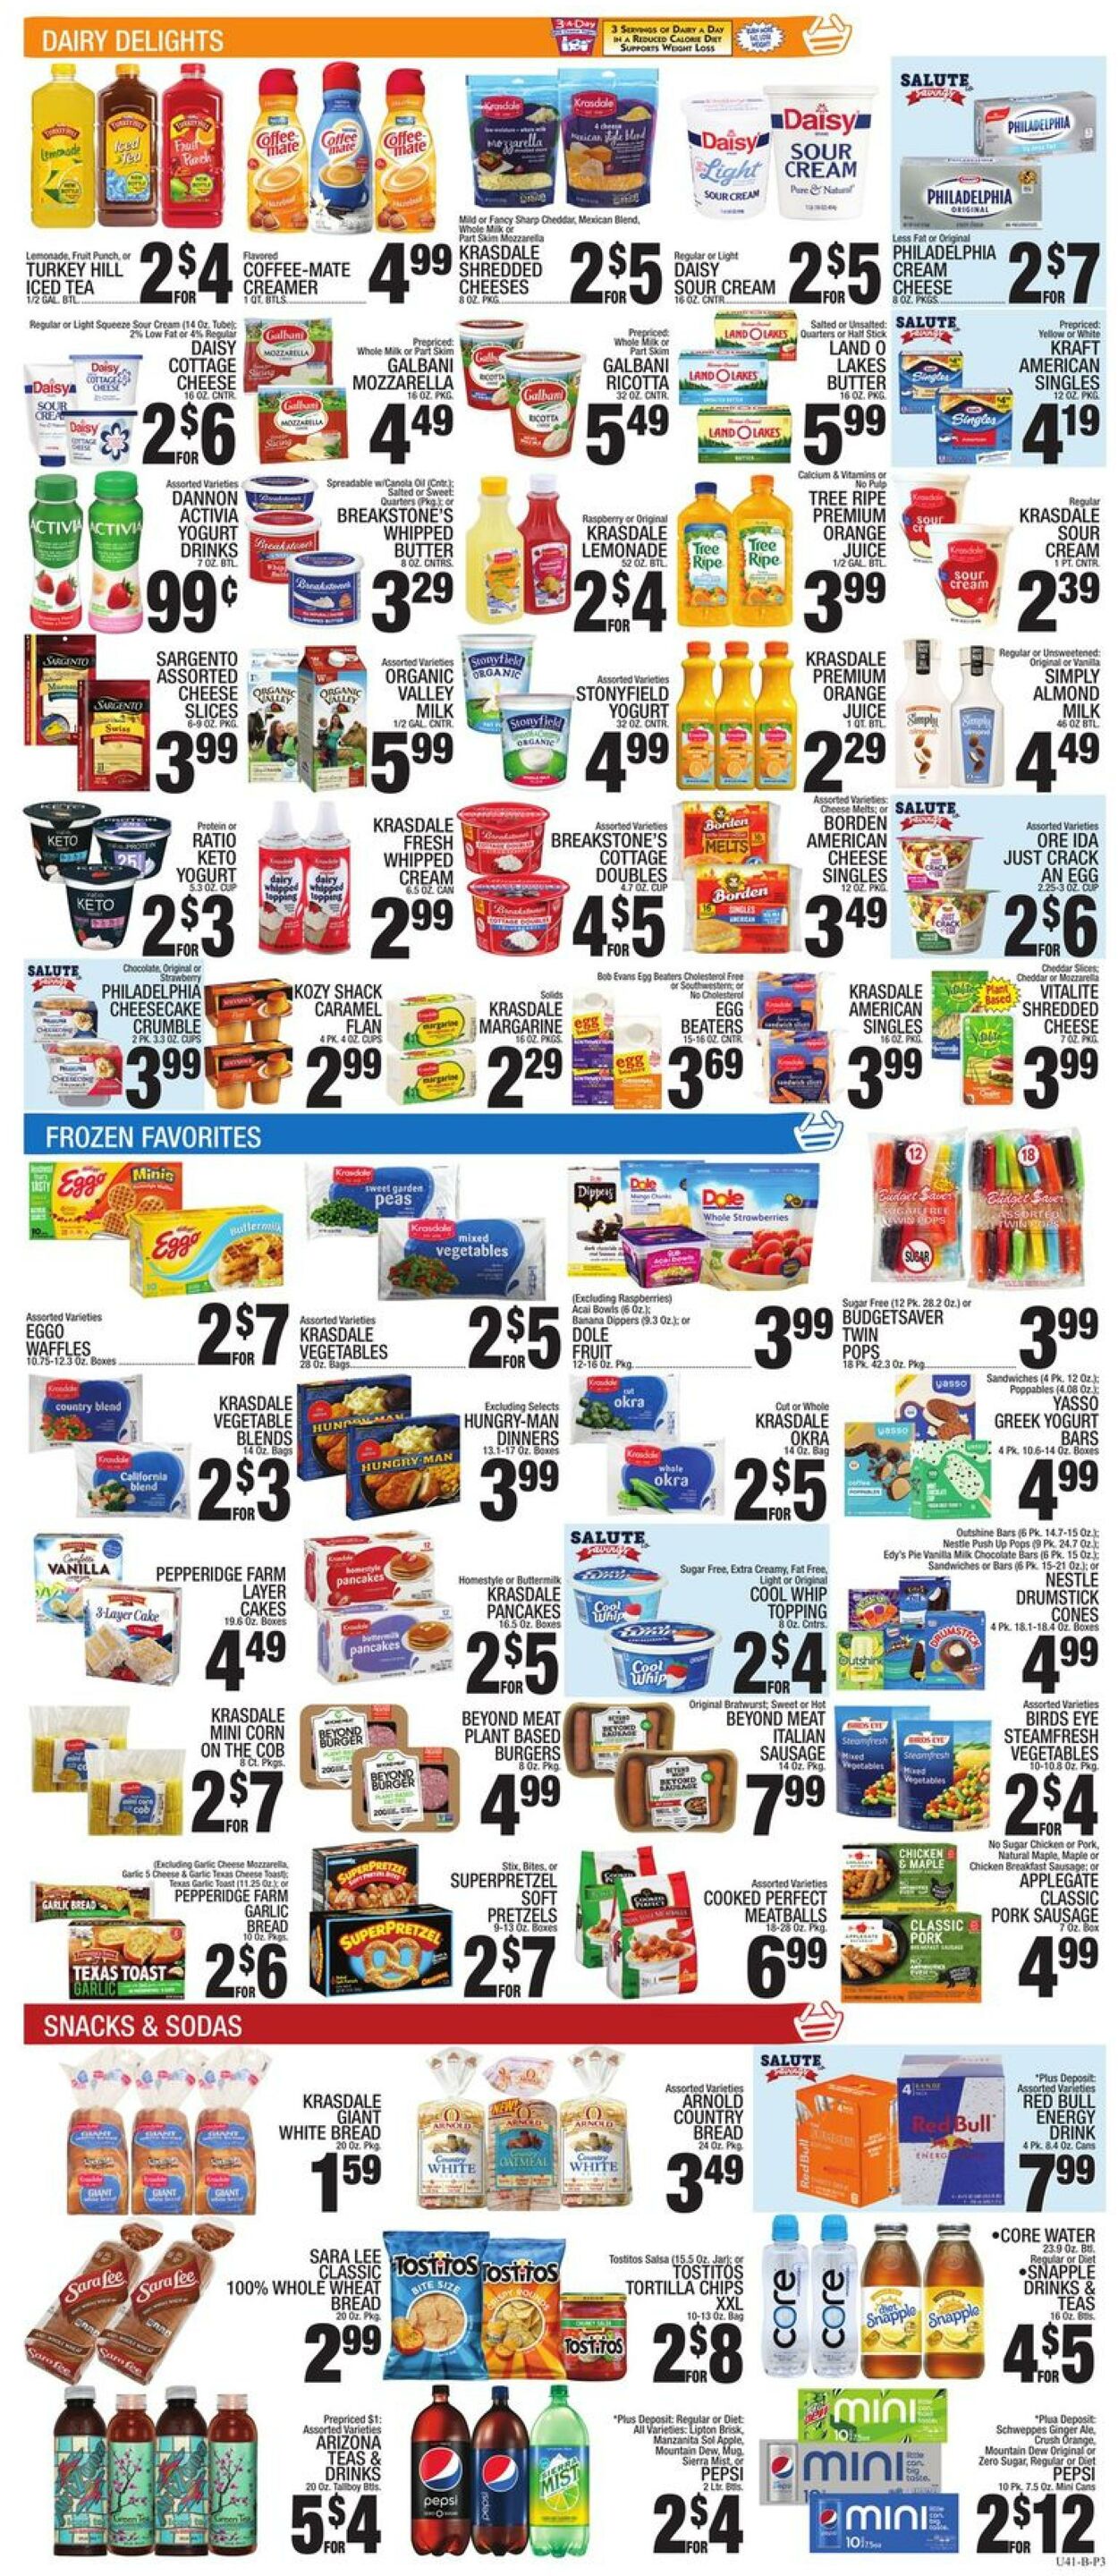 Weekly ad CTown 05/20/2022 - 05/26/2022